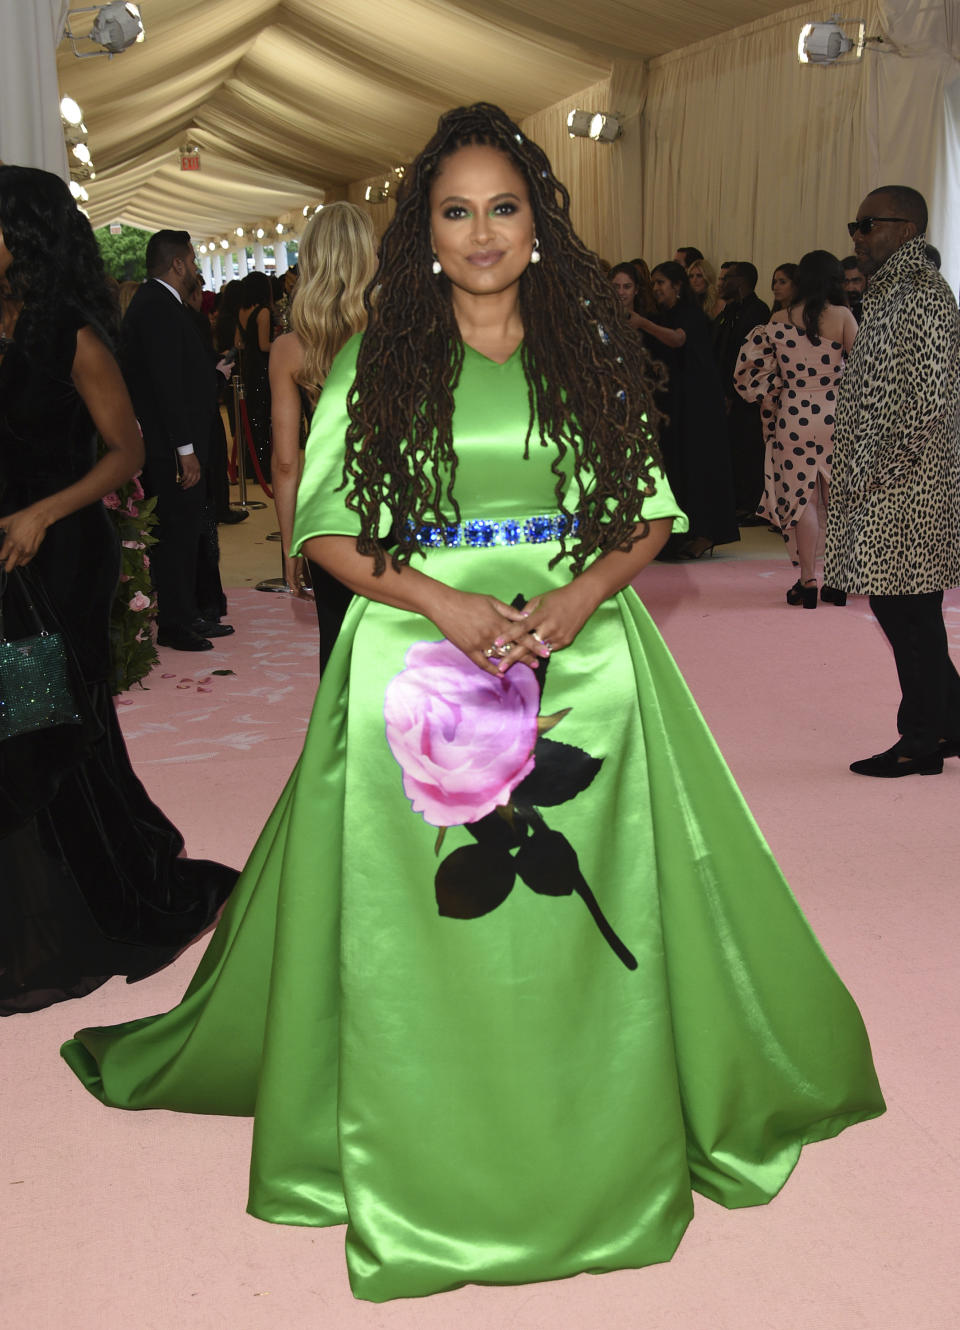 Ava DuVernay attends The Metropolitan Museum of Art’s Costume Institute benefit gala celebrating the opening of the “Camp: Notes on Fashion” in New York in 2019. (Photo: Evan Agostini/Invision/AP, Getty Images)